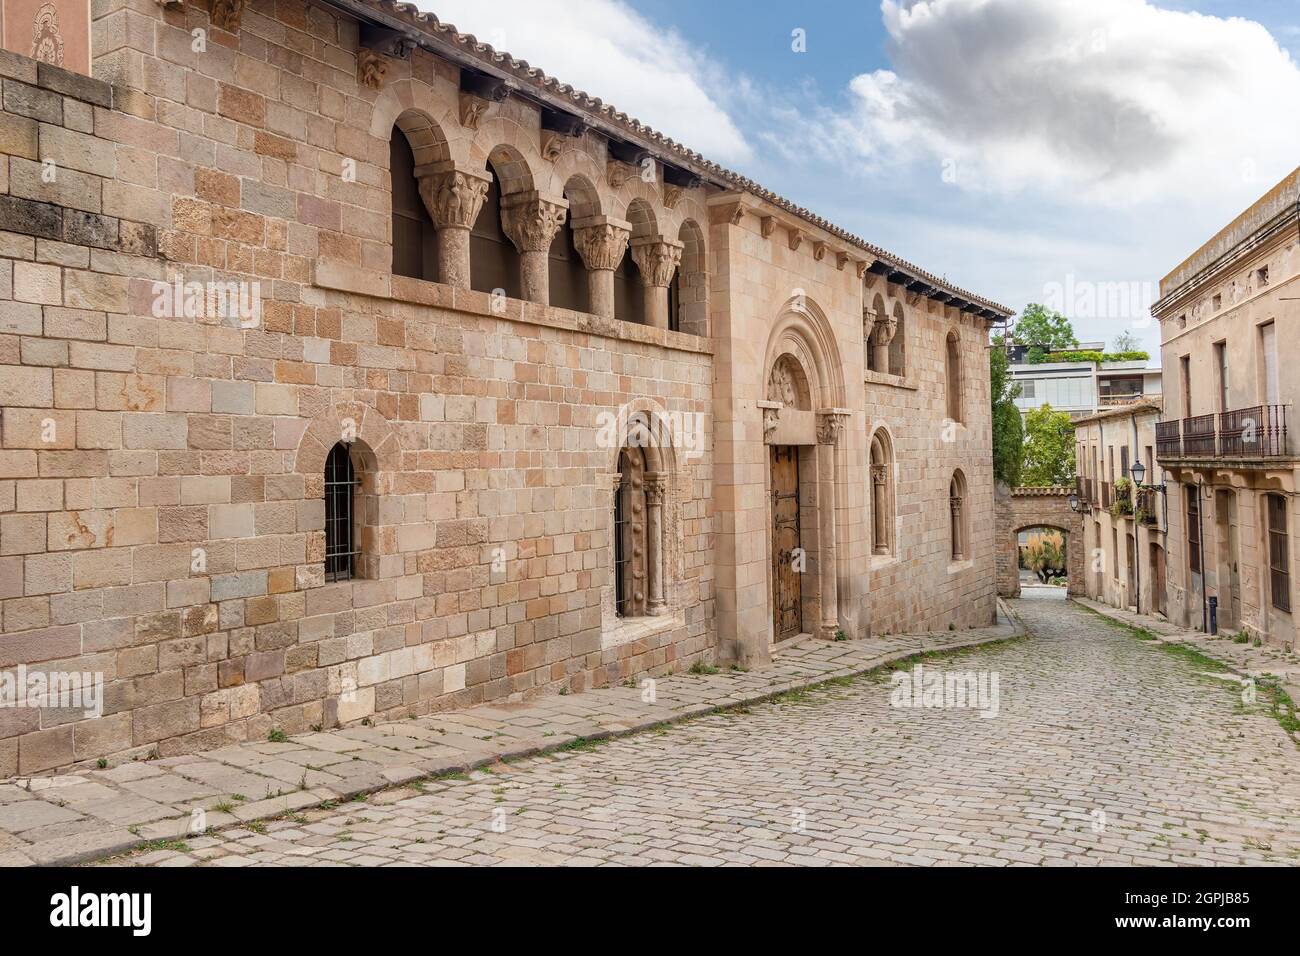 Exterior of the Monastery of Santa María de Pedralbes. The Royal Monastery of Santa María de Pedralbes is a set of Gothic-style monuments located in t Stock Photo